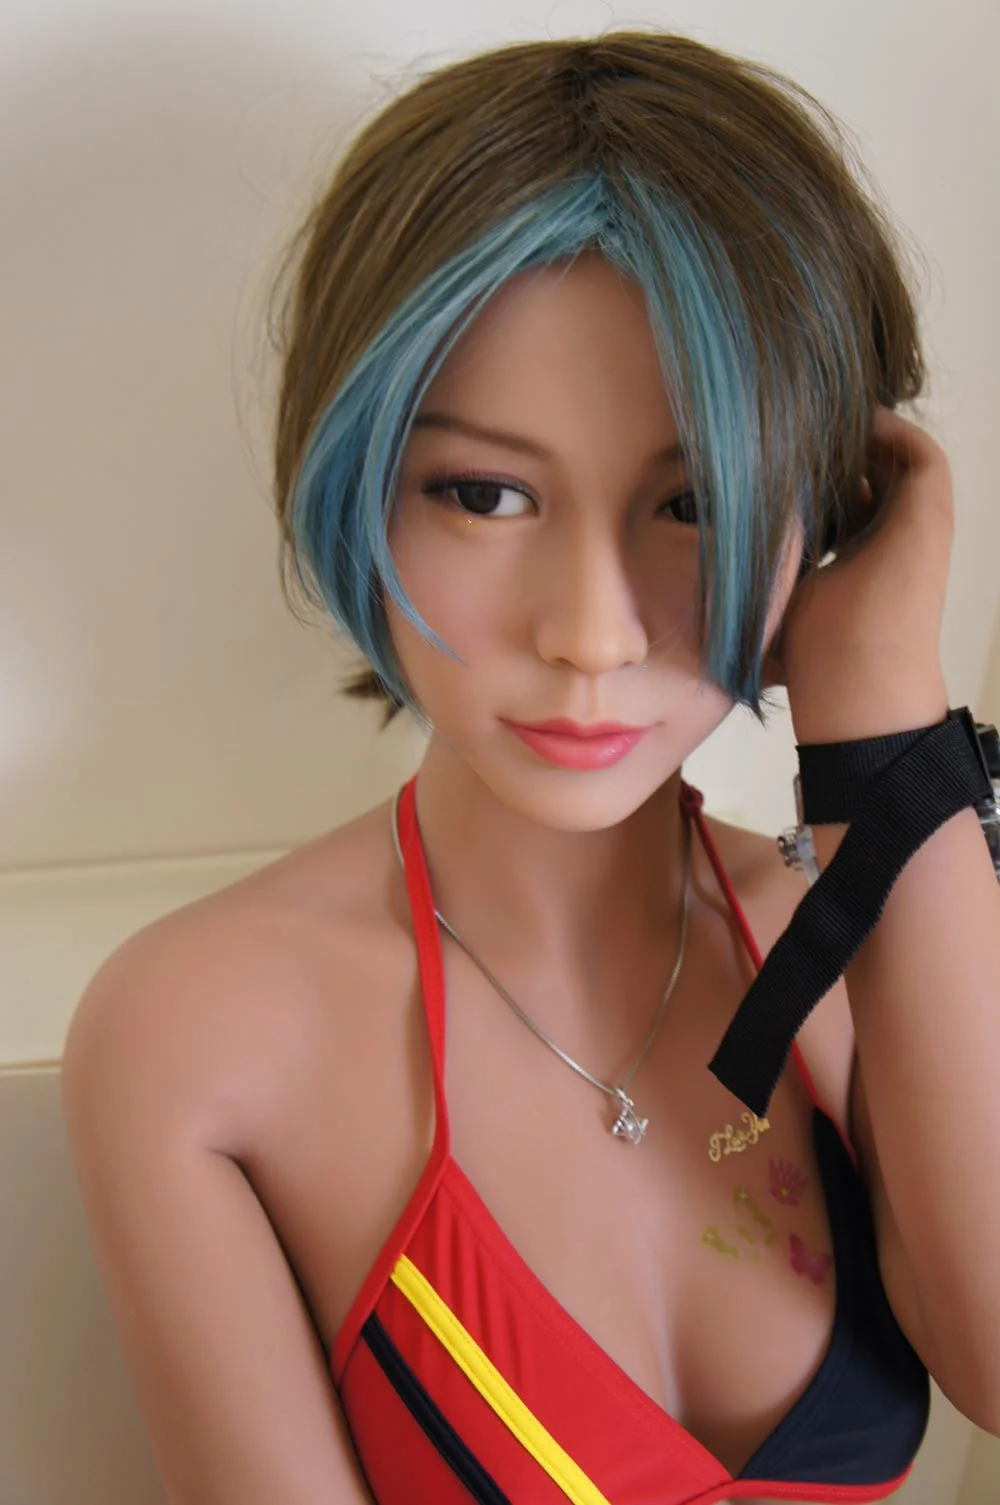 Sex doll with hand touching hair